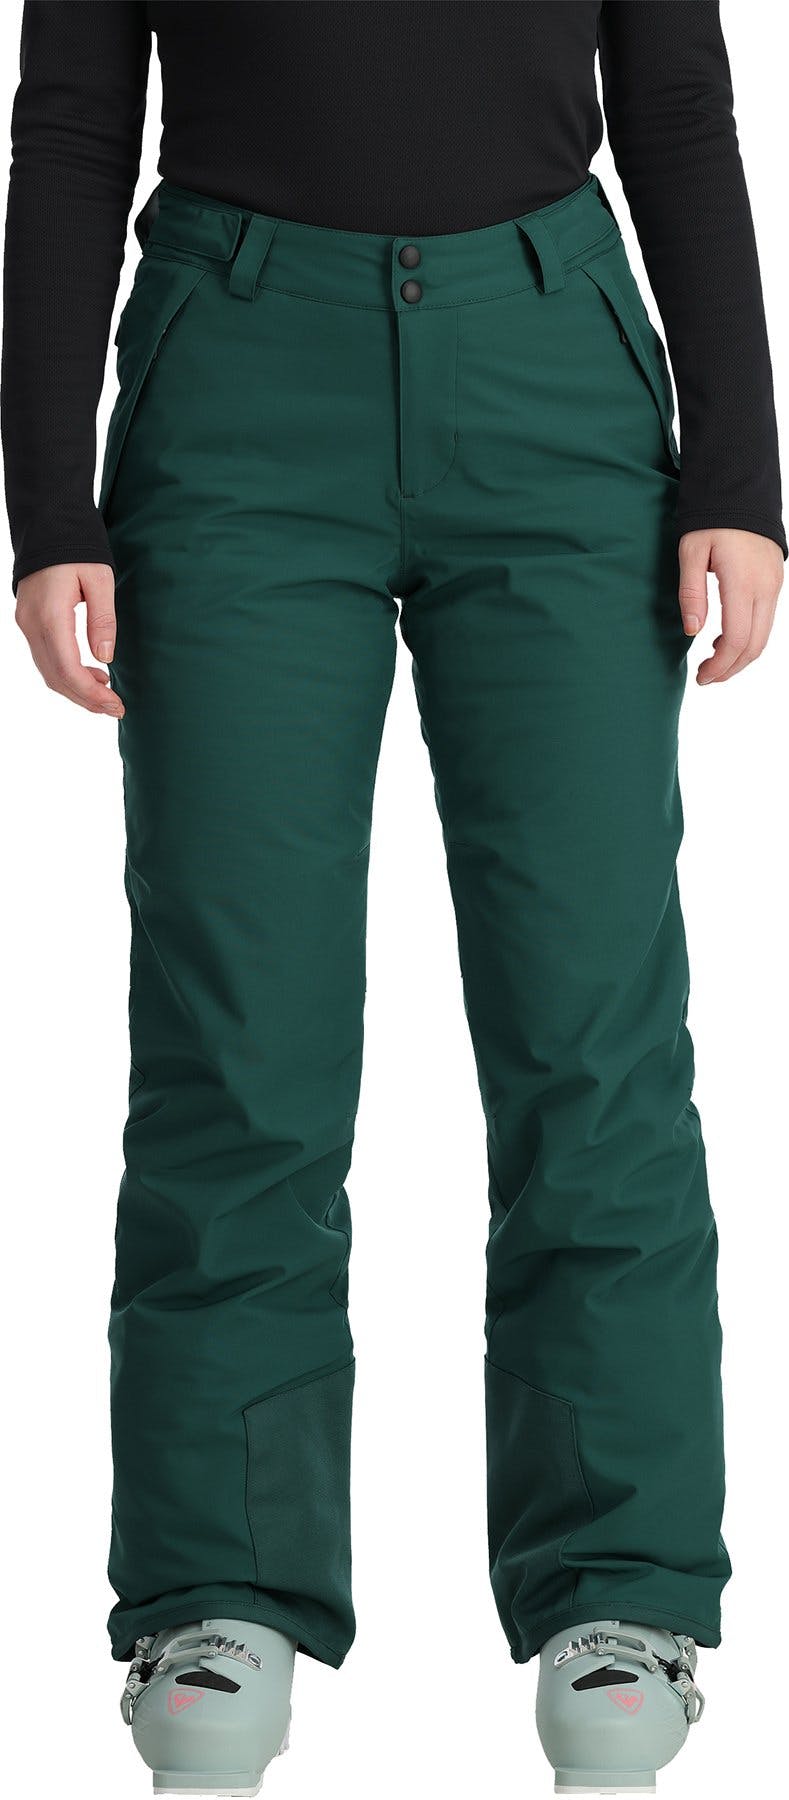 Product image for Section Pant - Women's